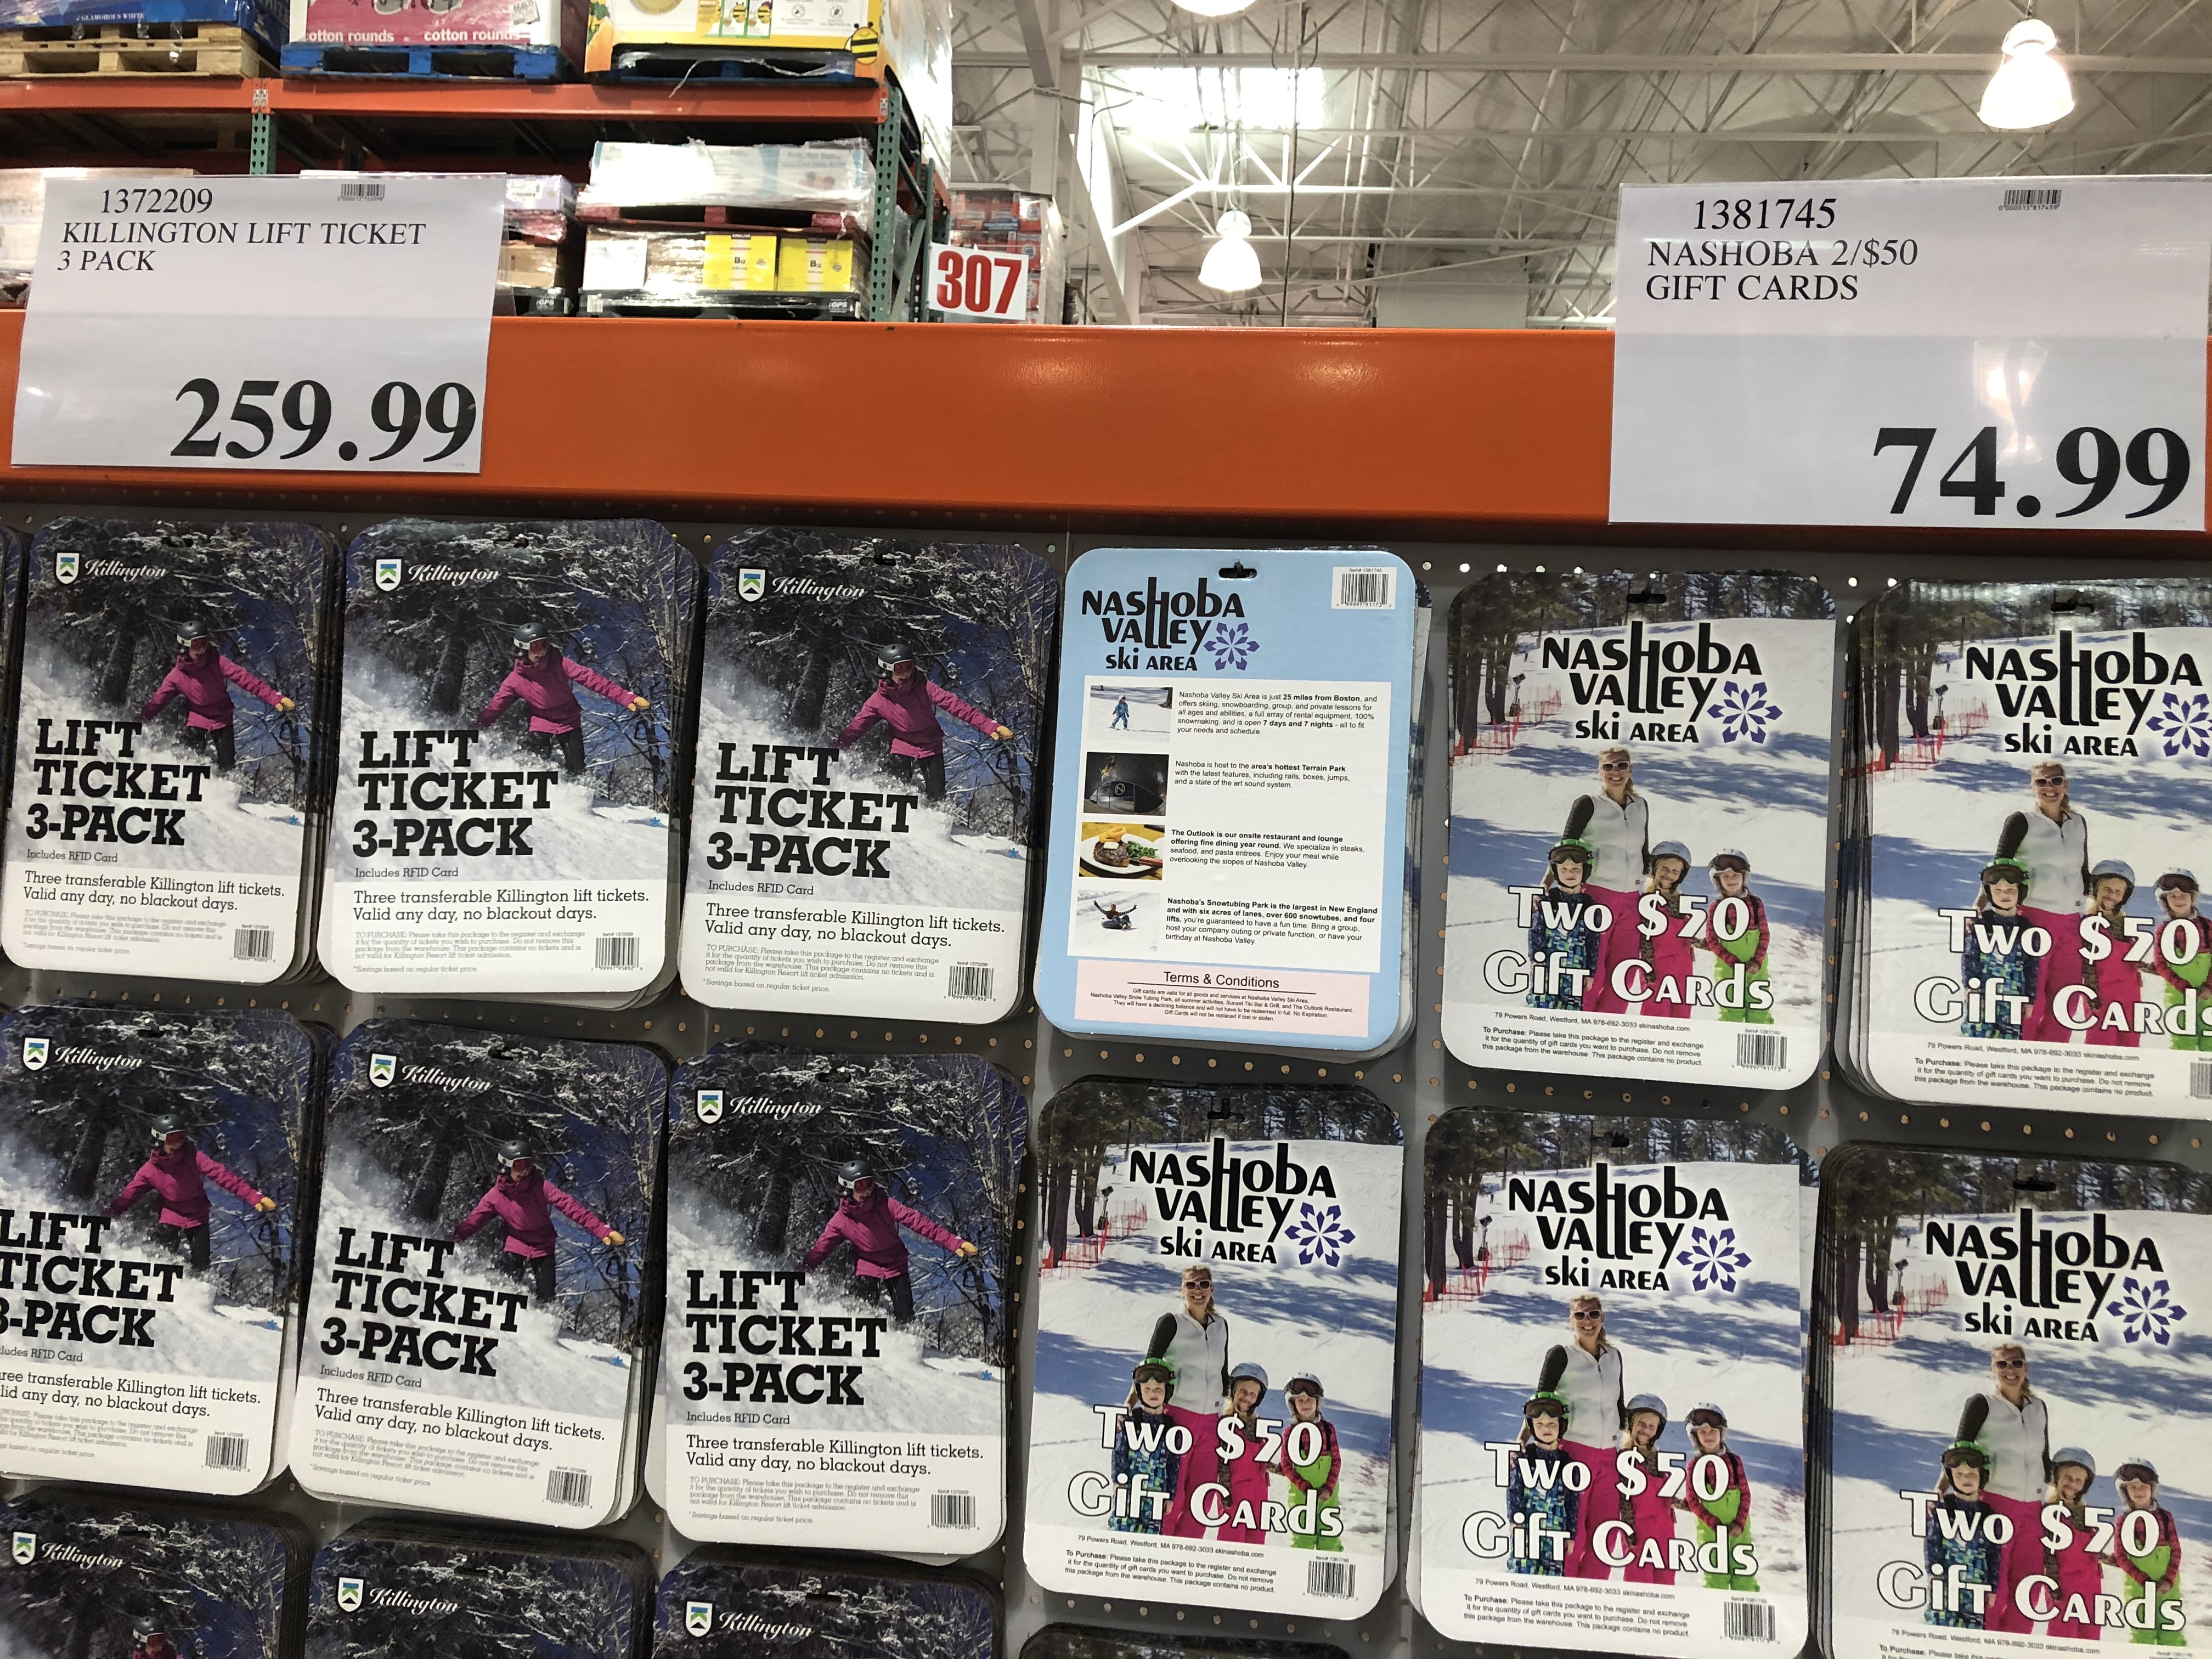 costco lift tickets deal will save you money for your next ski trip